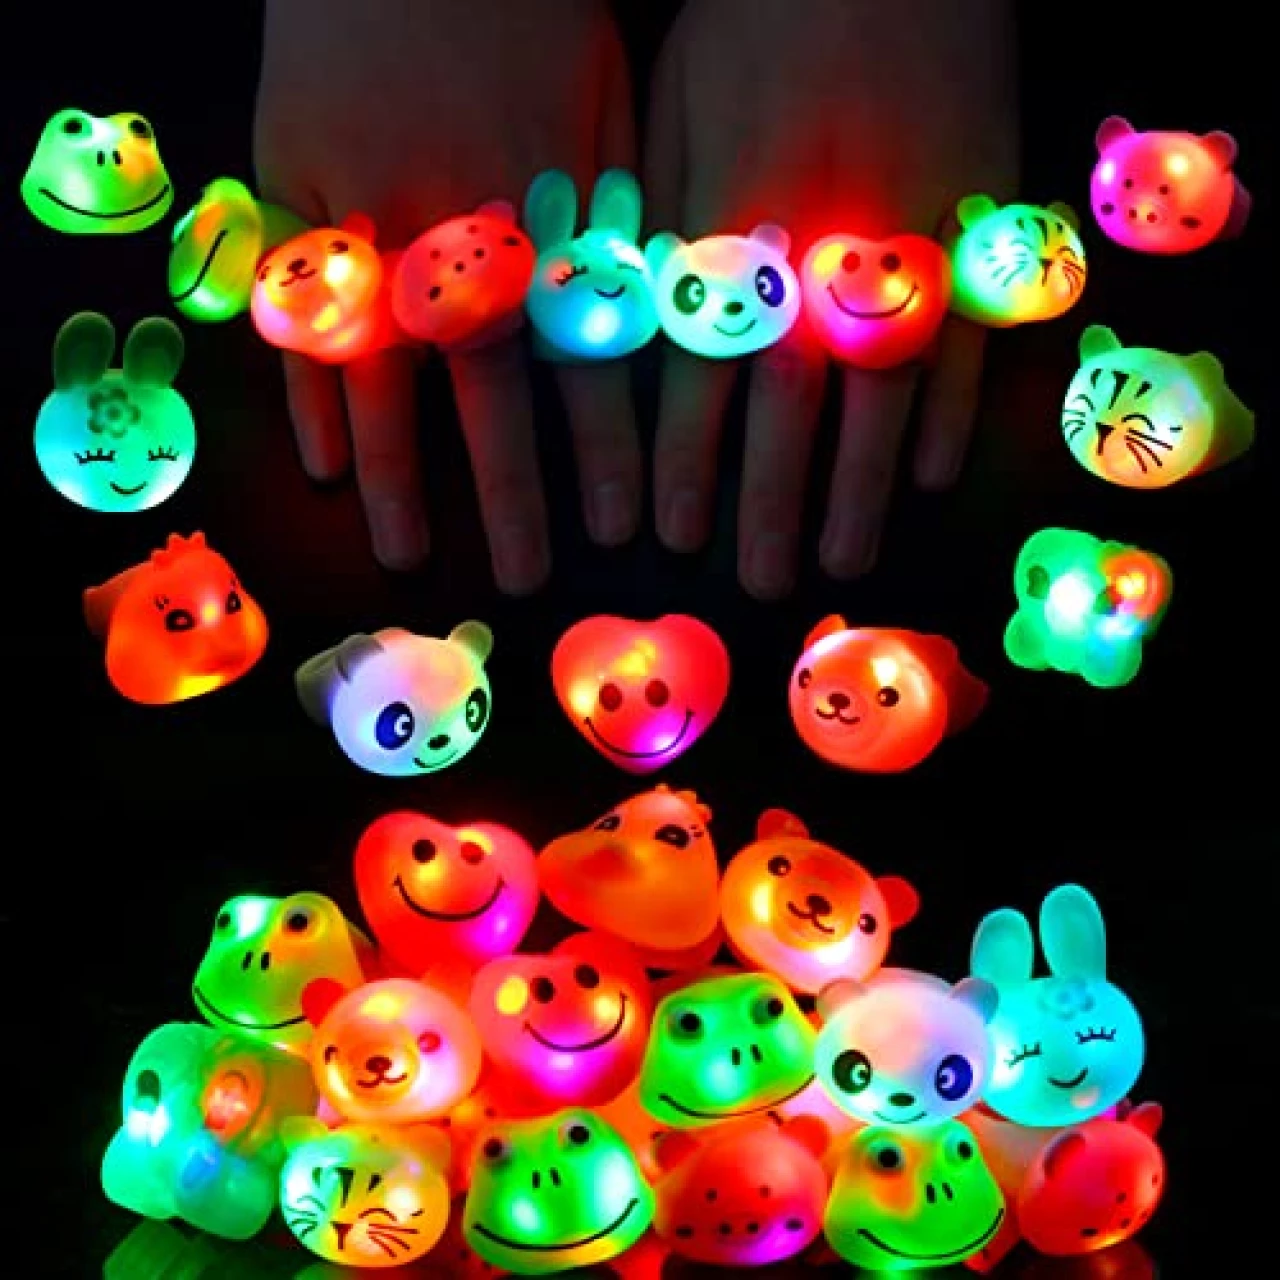 CCINEE 24Pcs Light Up Rings Flashing Colorful LED Animal Rubber Bumpy Jelly Rings Glow in Dark Finger Toys